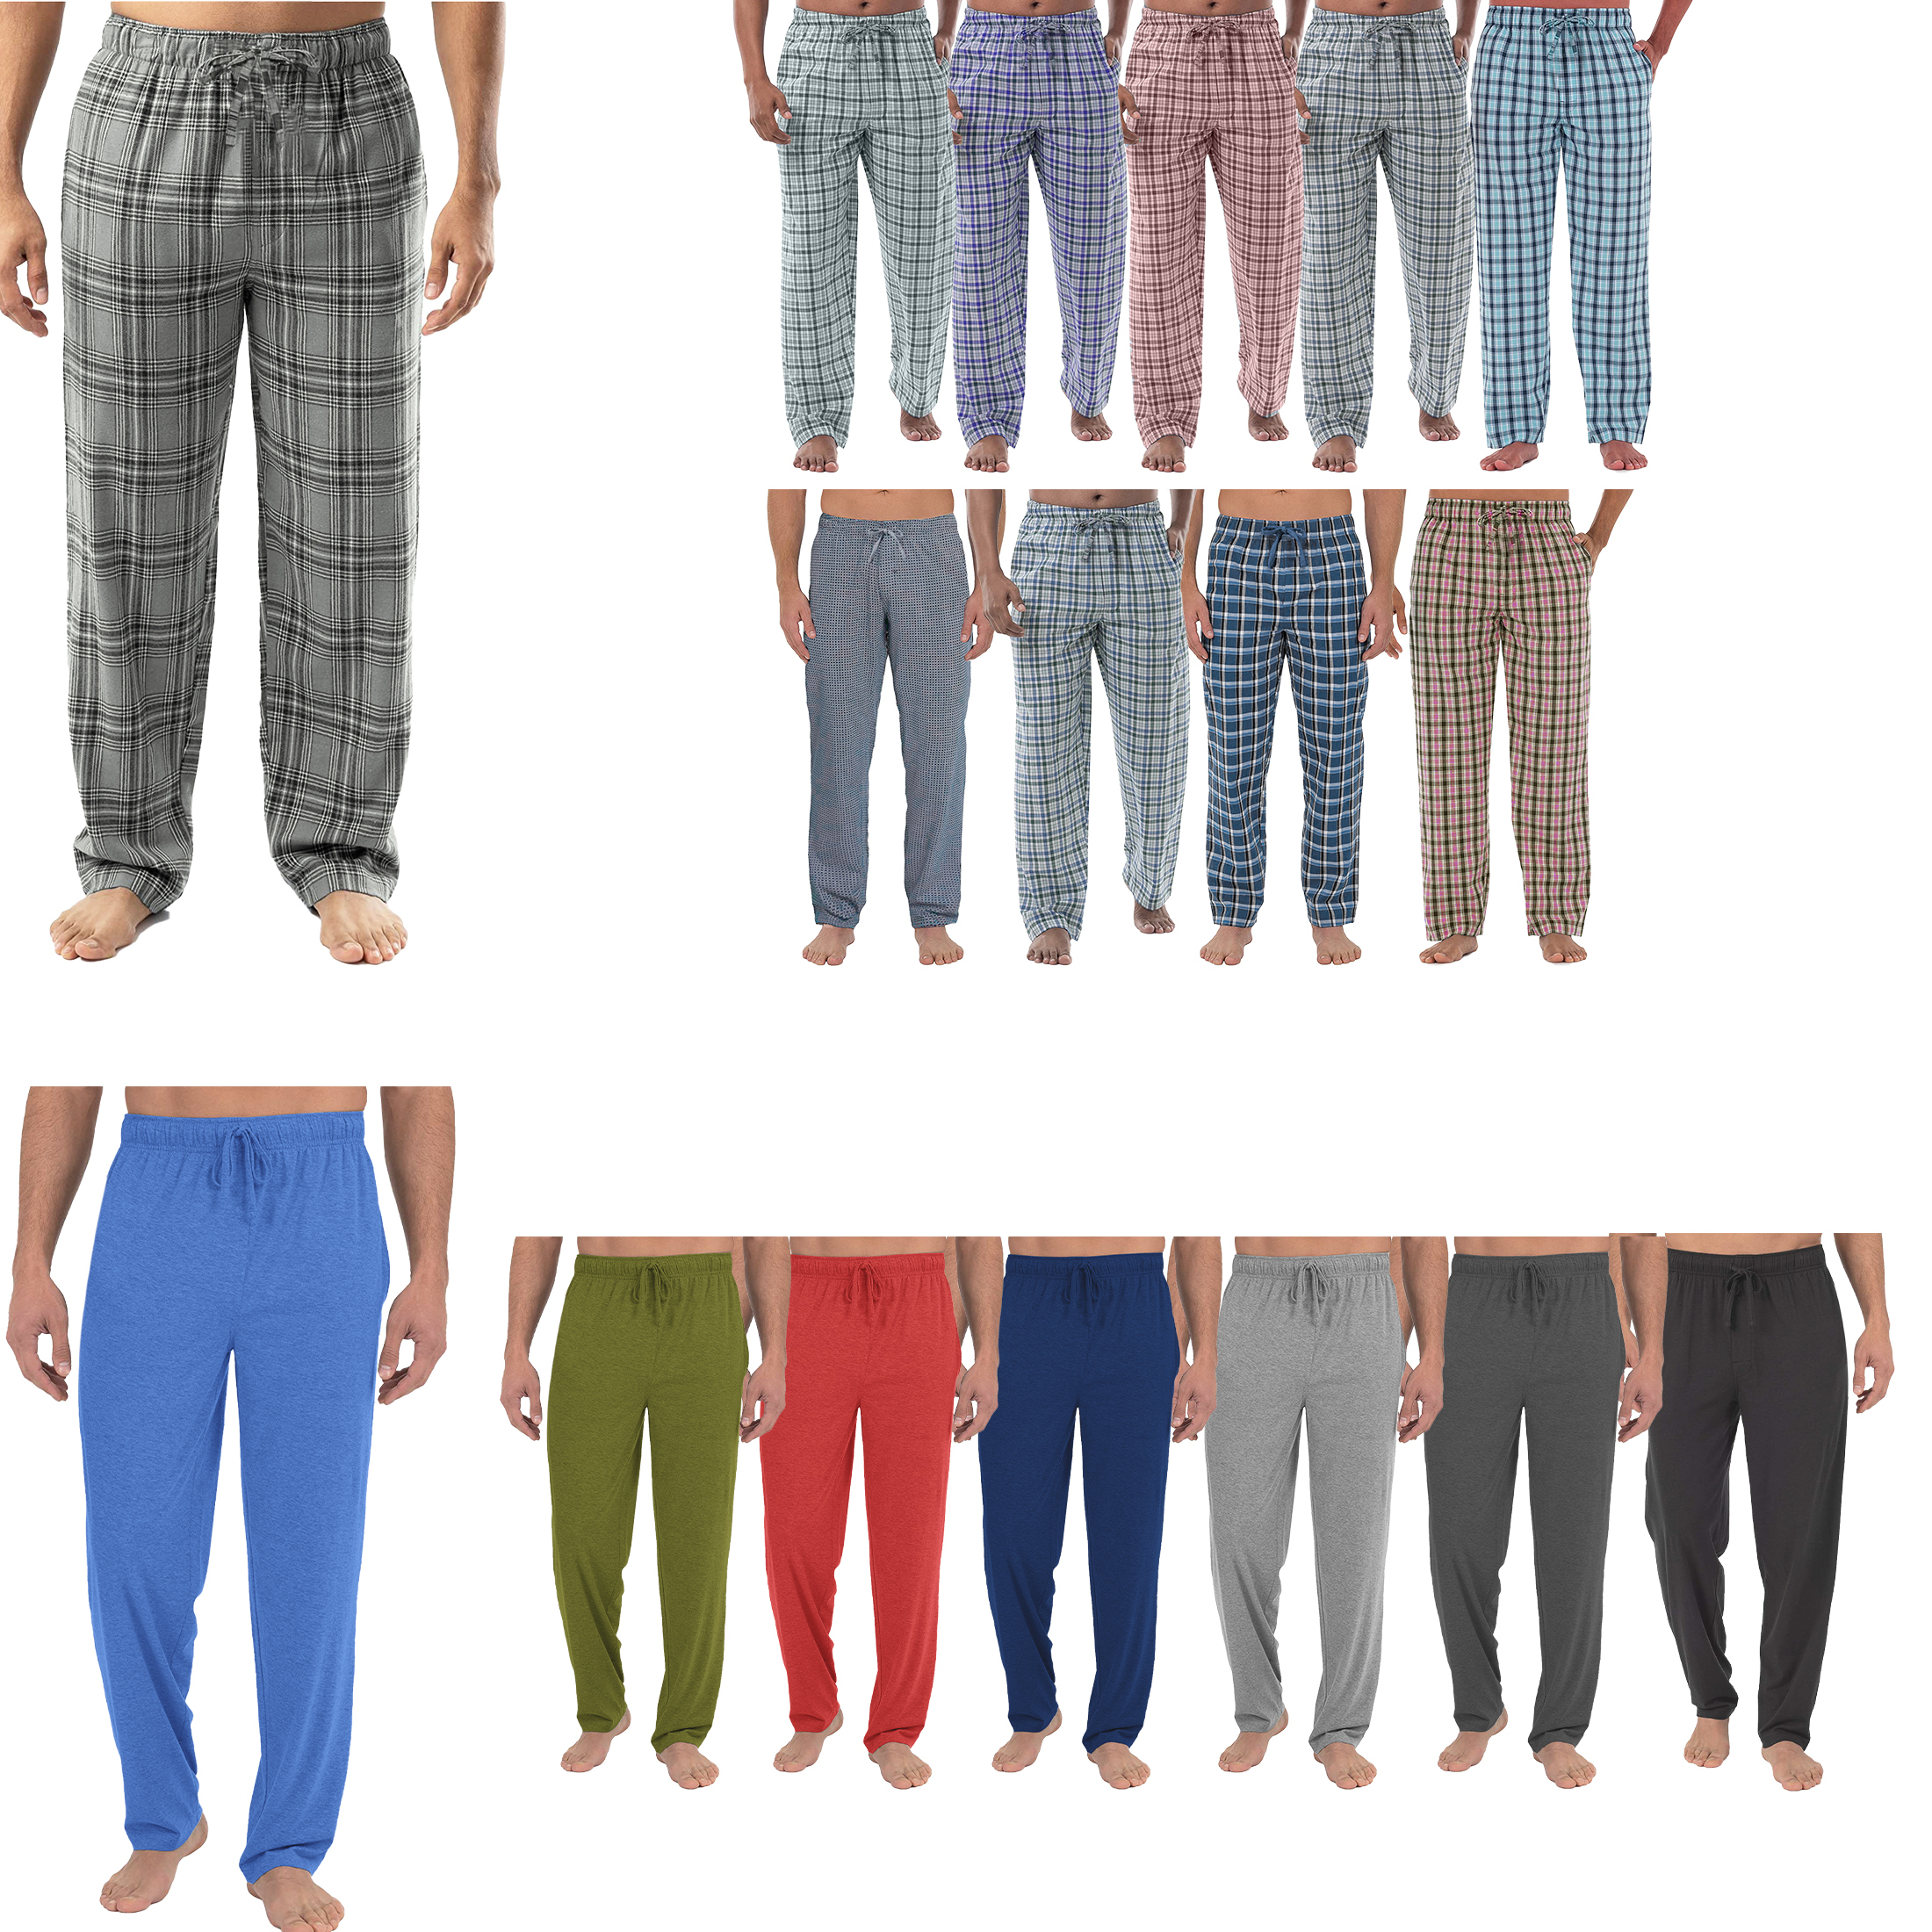 Men's Soft Jersey Knit Long Lounge Sleep Pants With Pockets - Plaid, X-Large